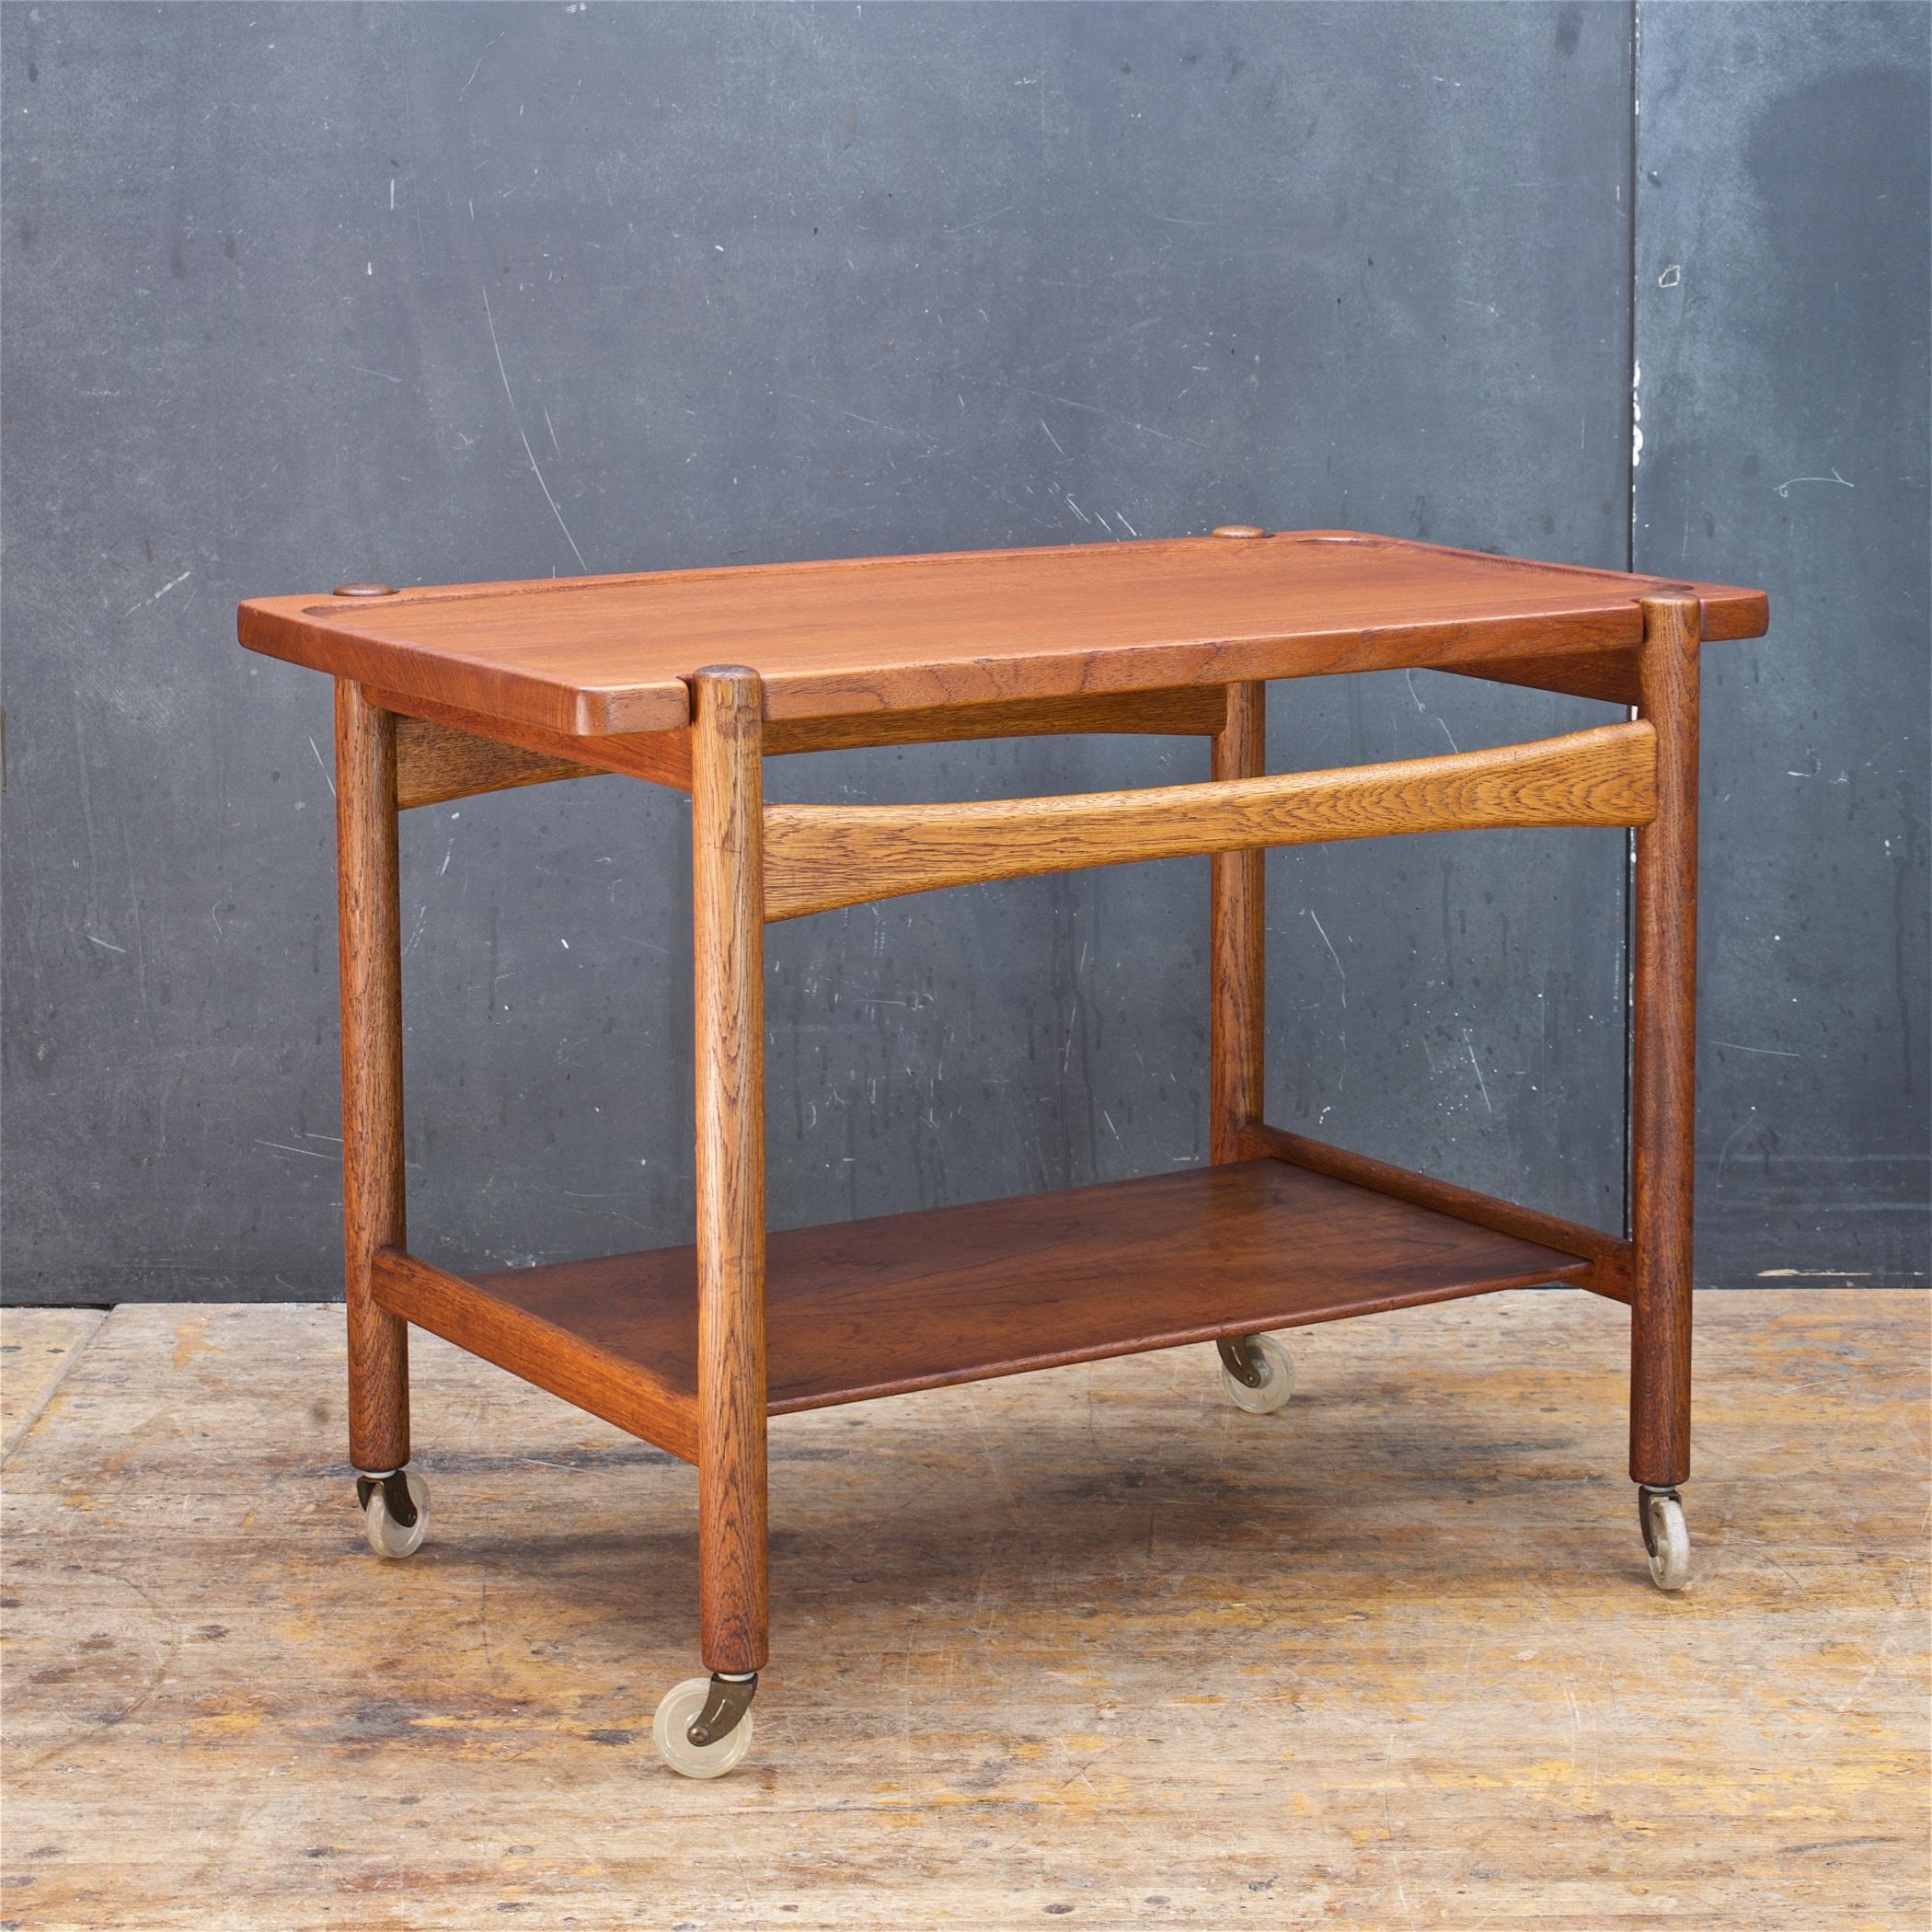 Wonderful and heavily patinated solid teak and solid oak serving trolly by Hans J. Wegner. We lightly refinished both side of the sold teak top board and deeply cleaned the rest. However the cart still retains a wonderful (well loved and used,) dark